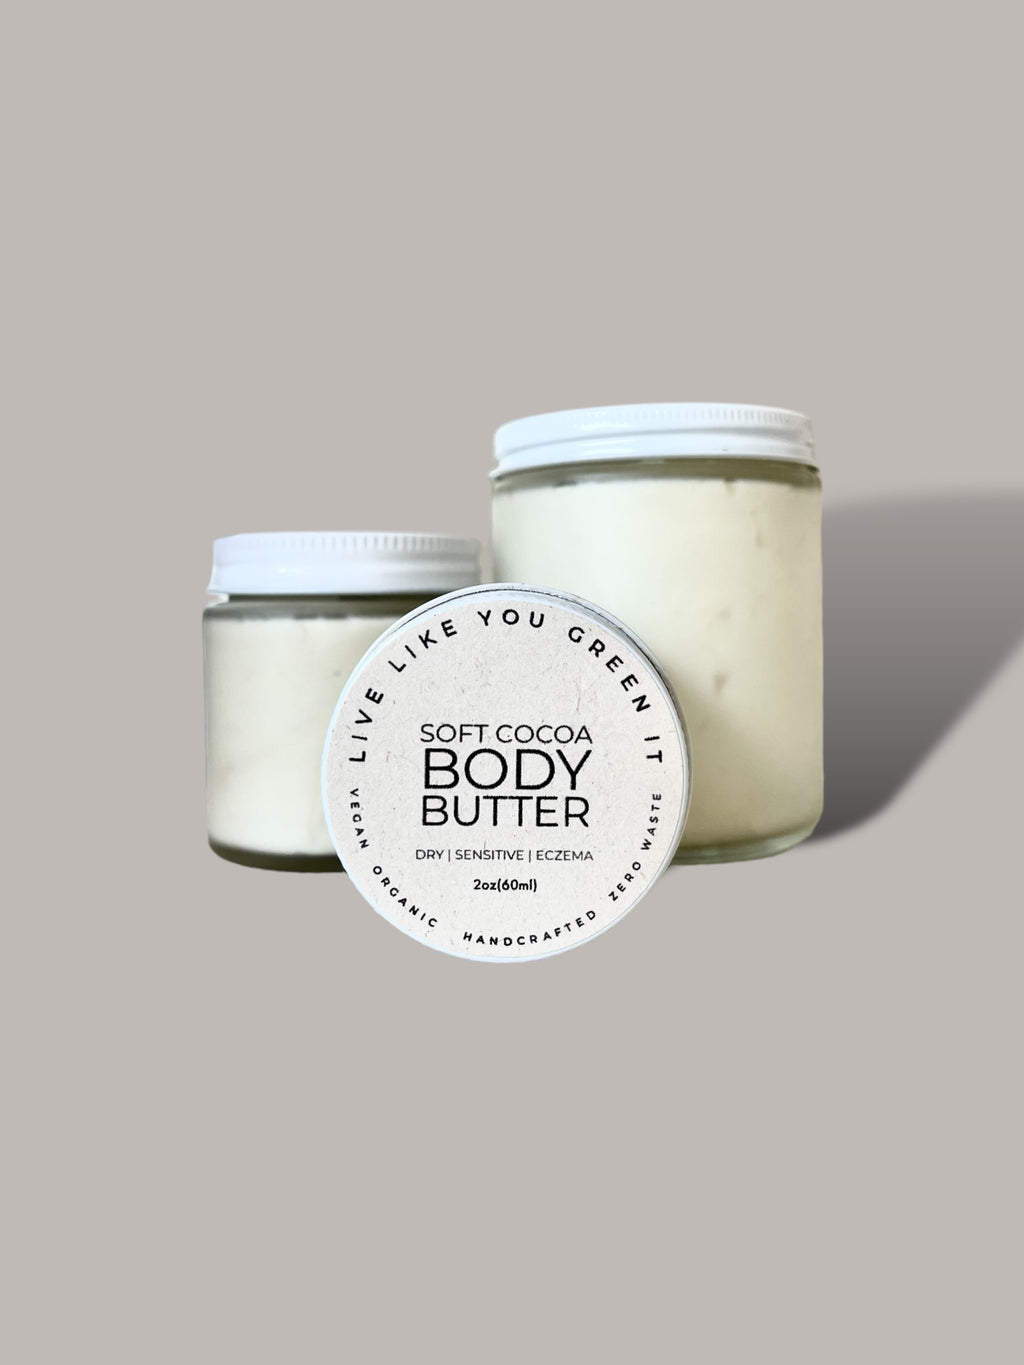 Soft Cocoa Body Butter | No Added Fragrance | Sensitive Skin & Eczema Relief Live Like You Green It